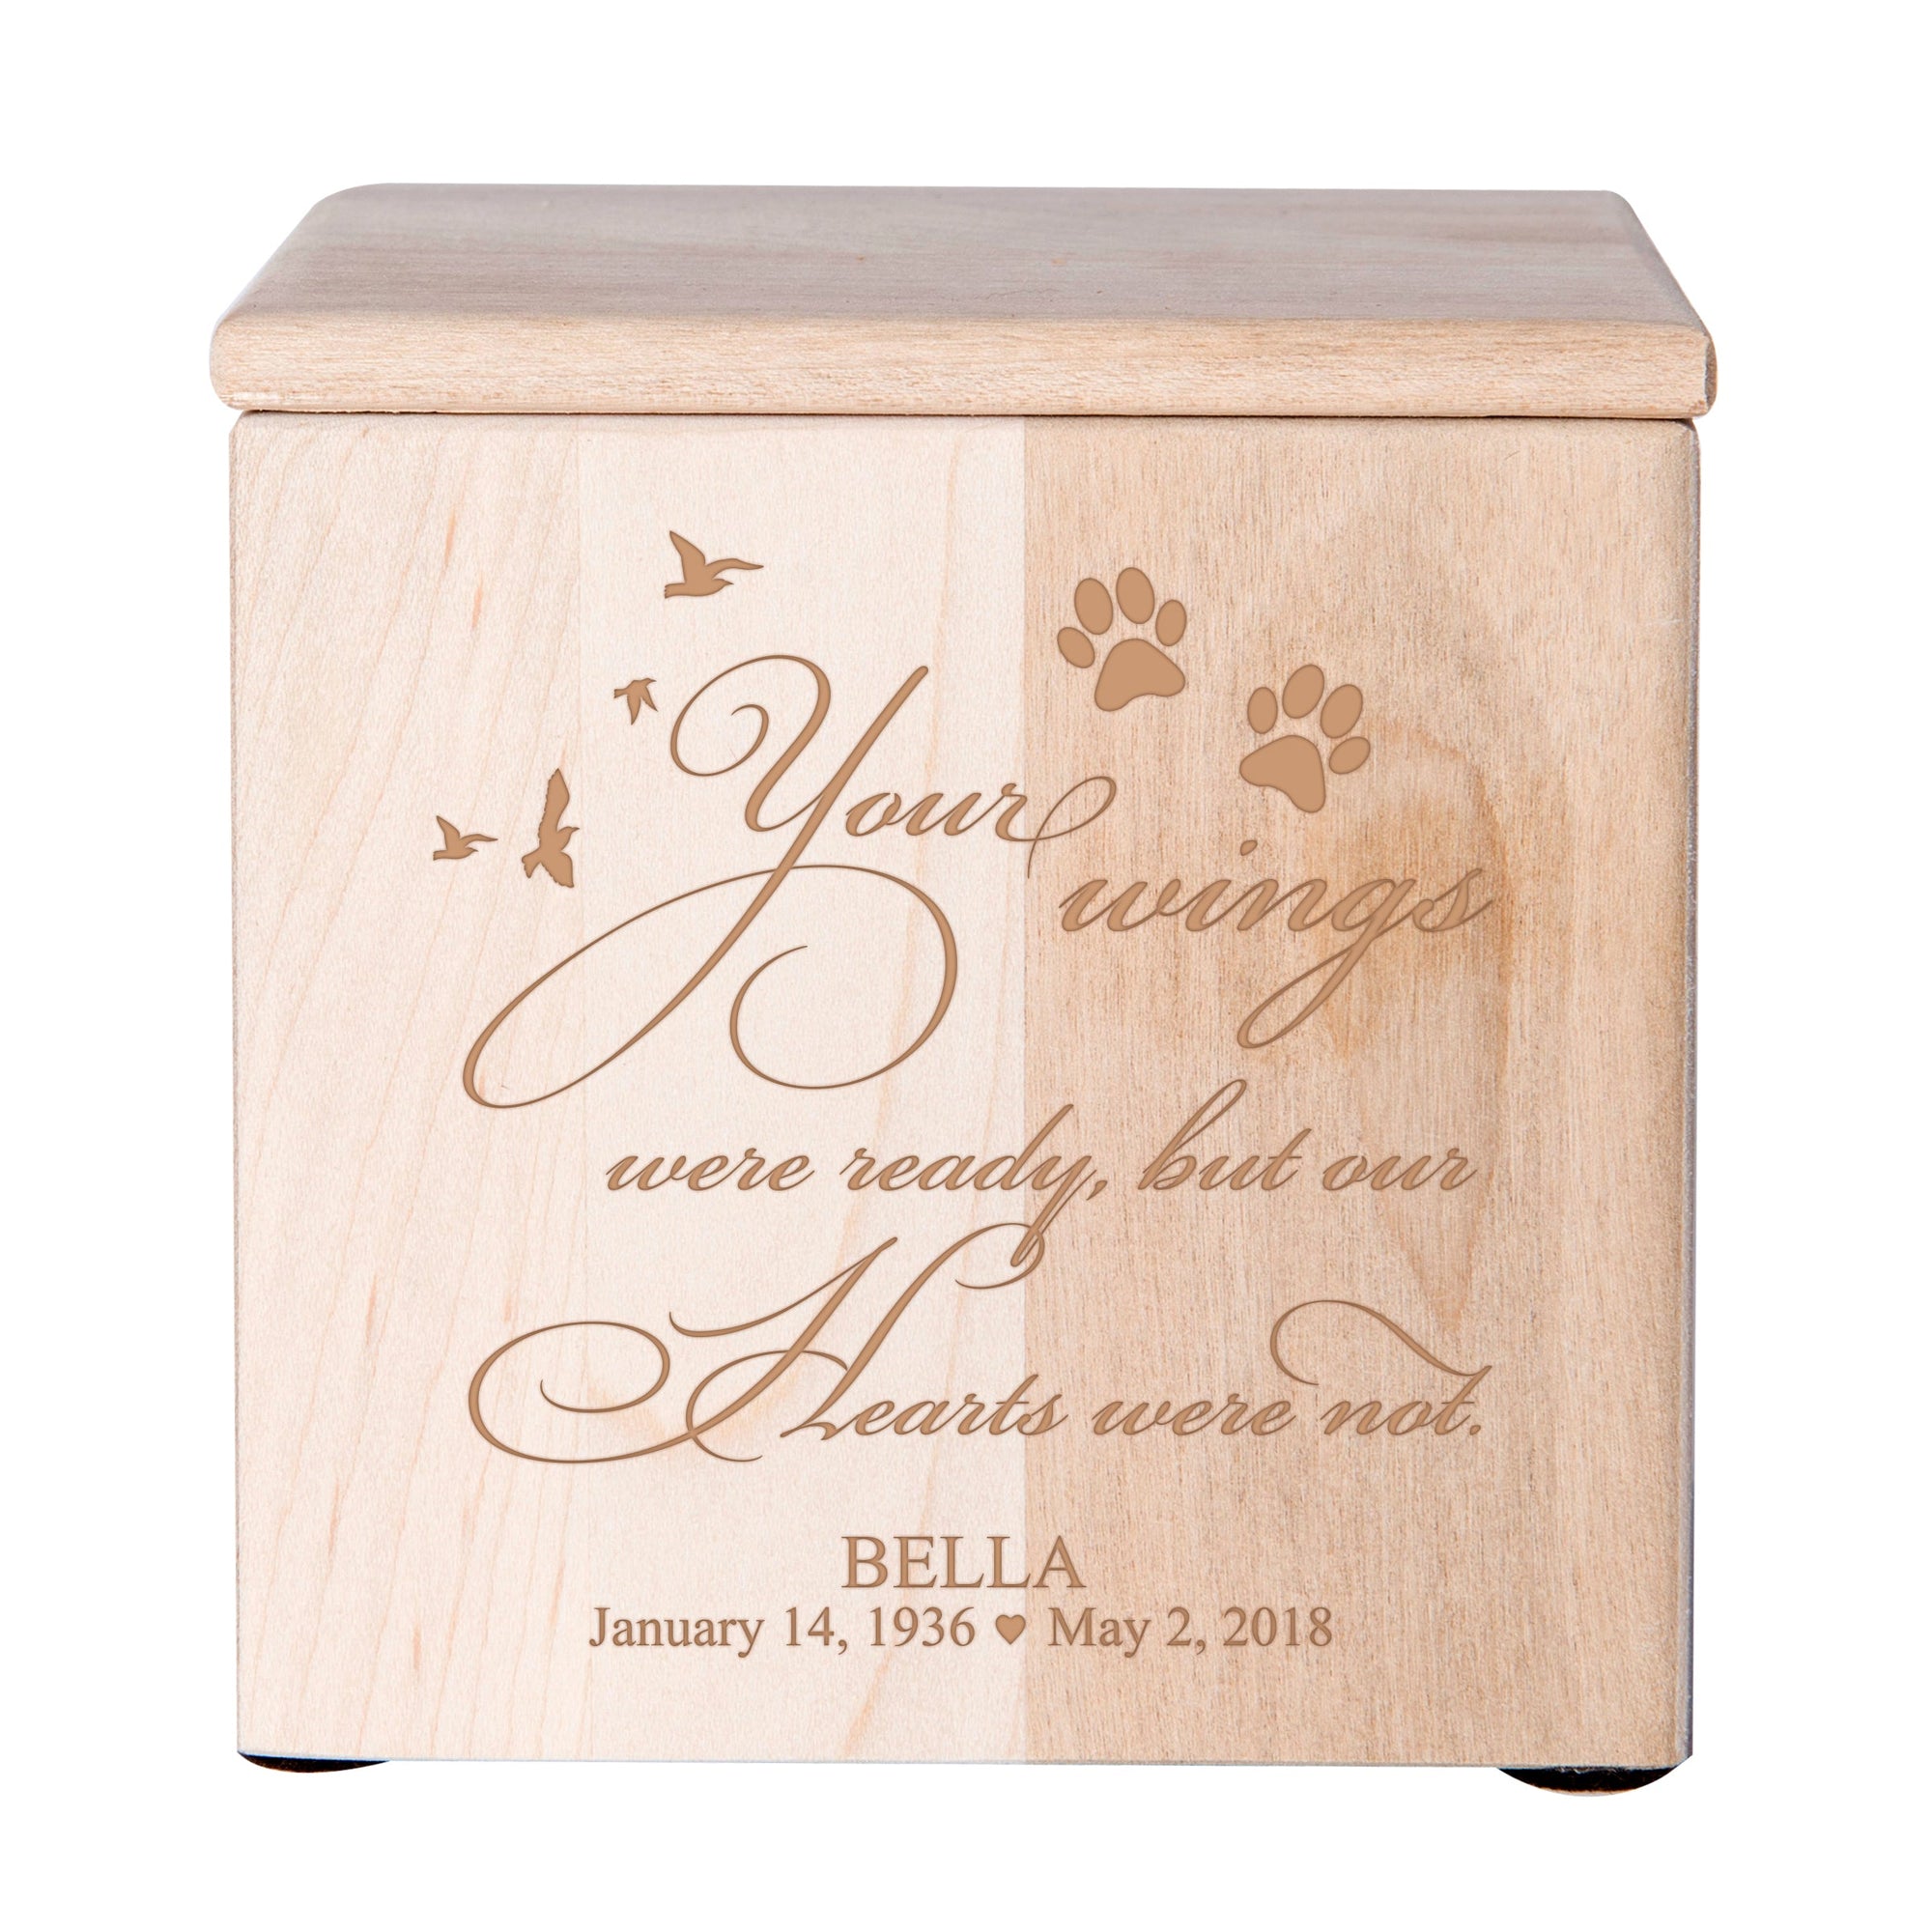 Pet Memorial Keepsake Cremation Urn Box for Dog or Cat - Your Wings Were Ready